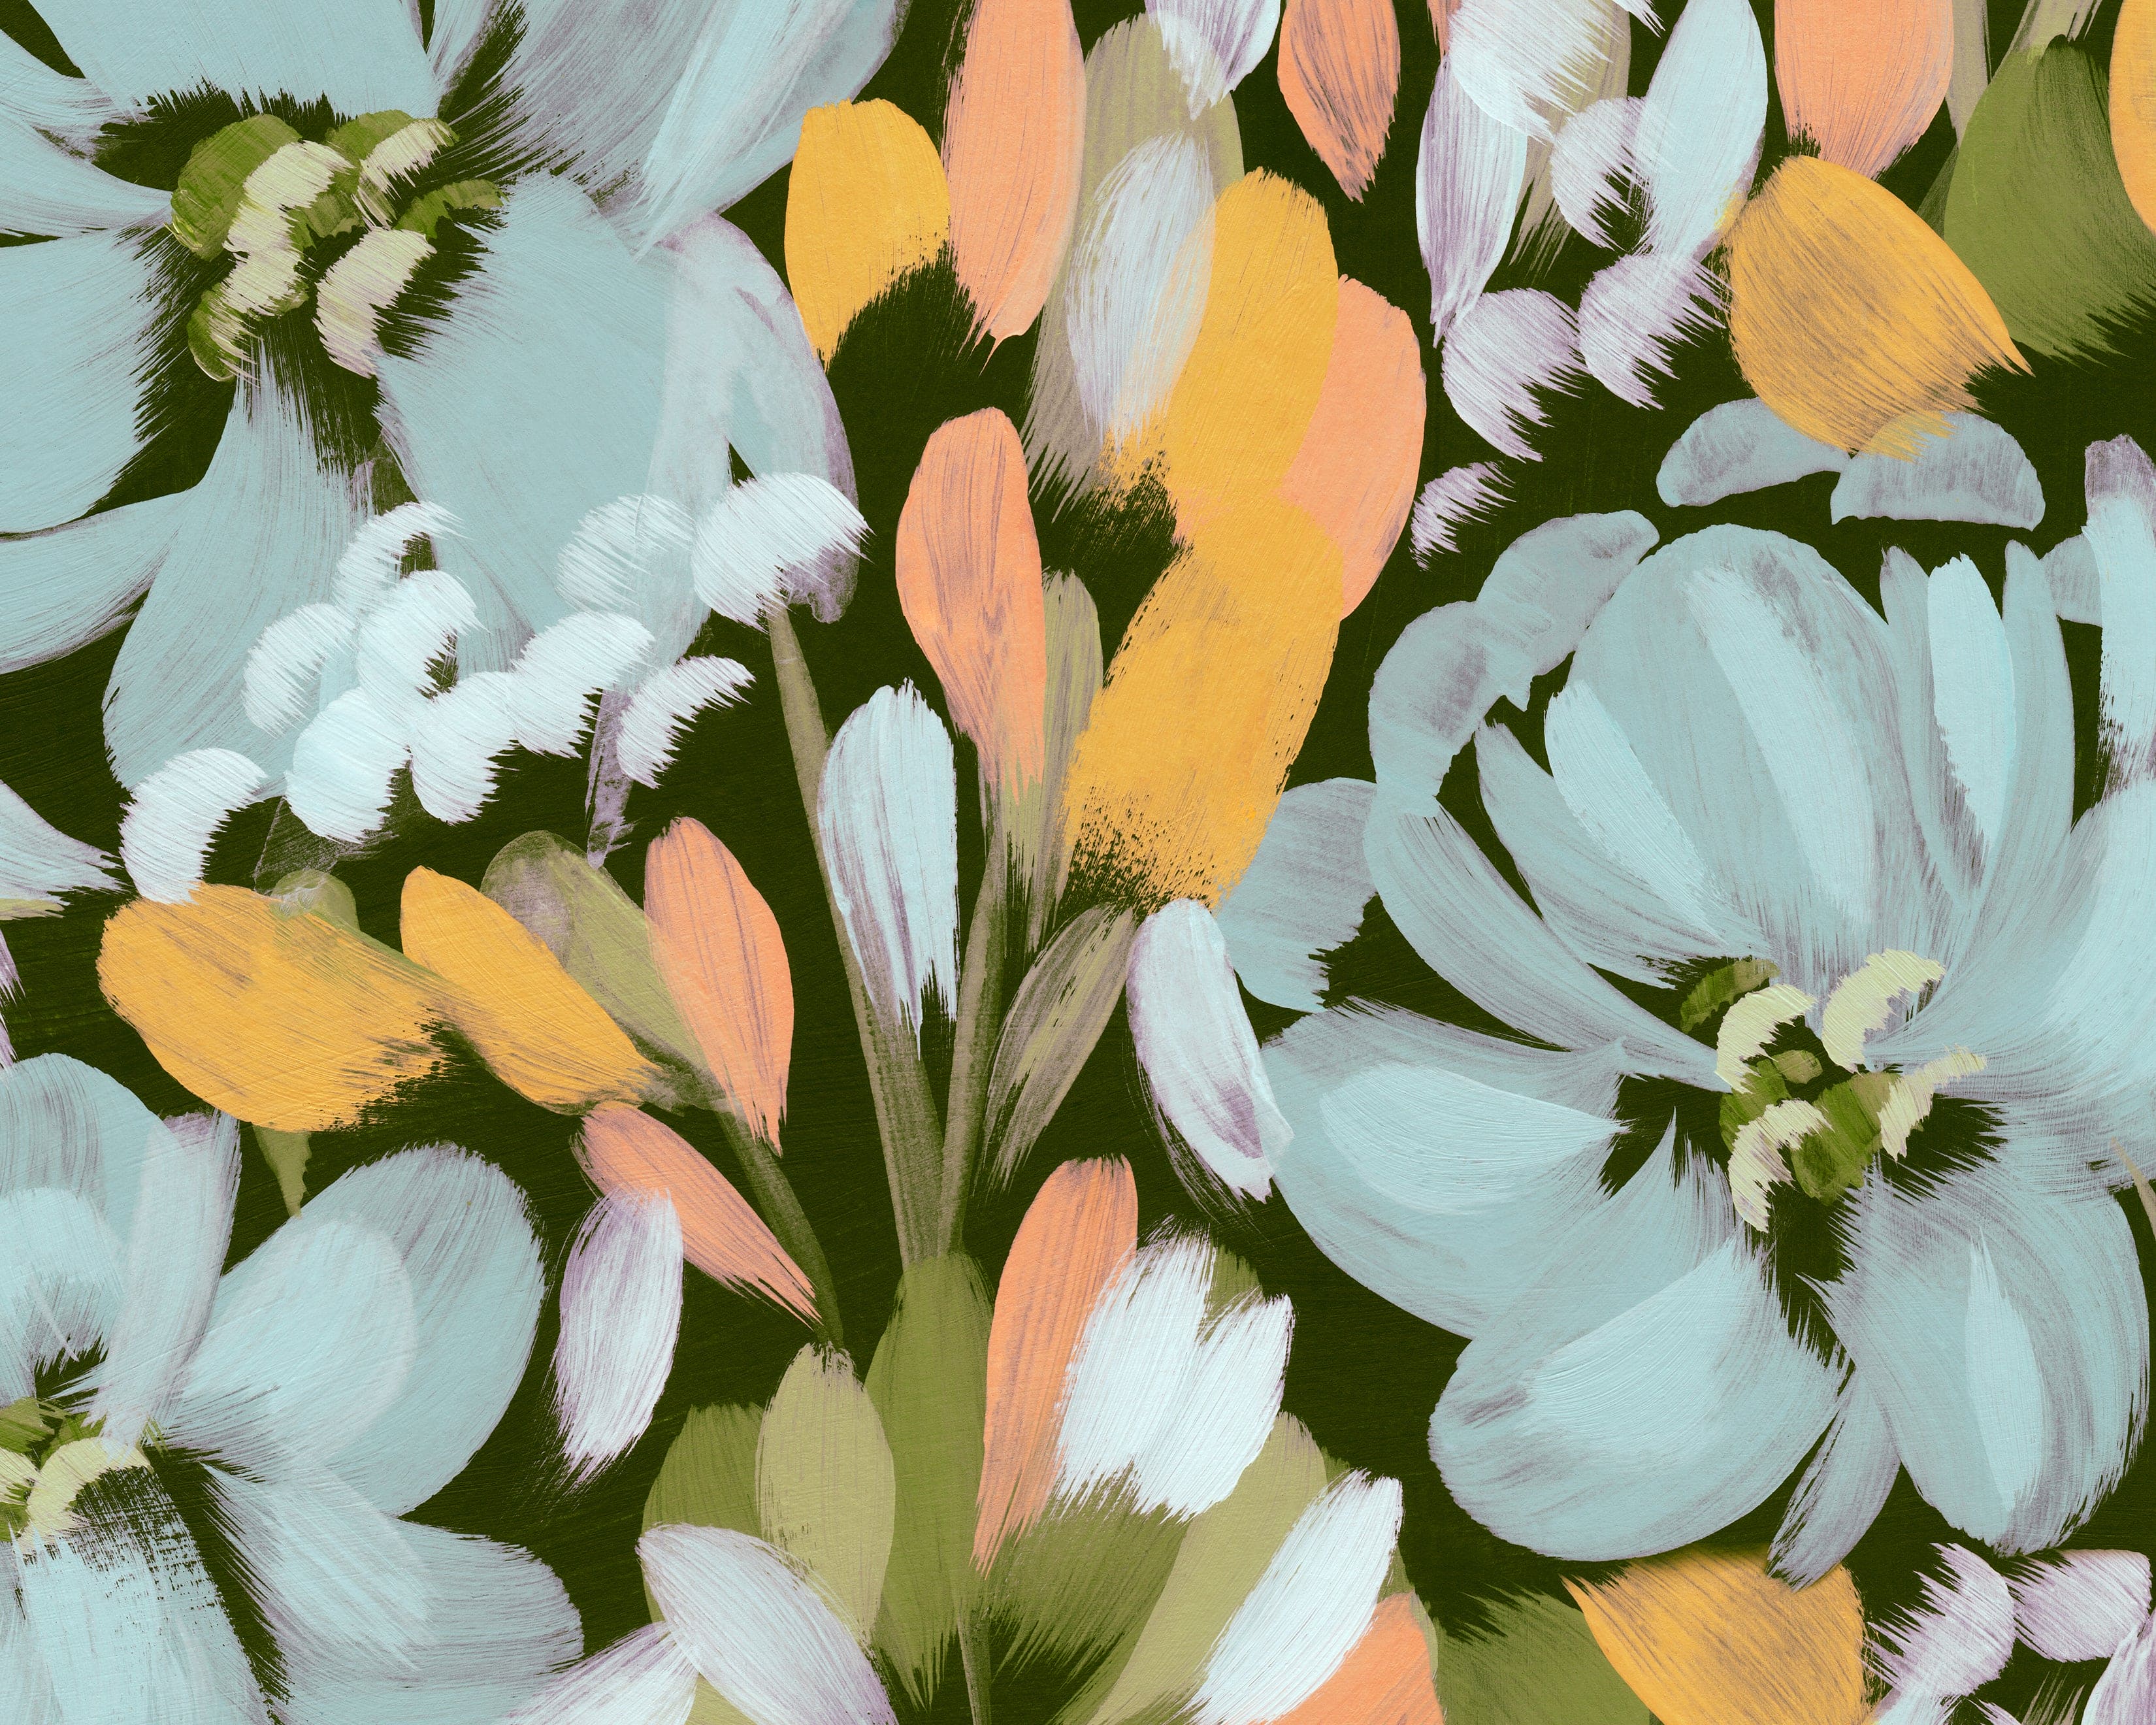 Close-up view of the Summer Floral Mural Wallpaper, showcasing the painterly strokes and bold color contrasts of the abstract flowers, creating a striking visual impact that mimics a modern art piece with a warm, summery vibe.